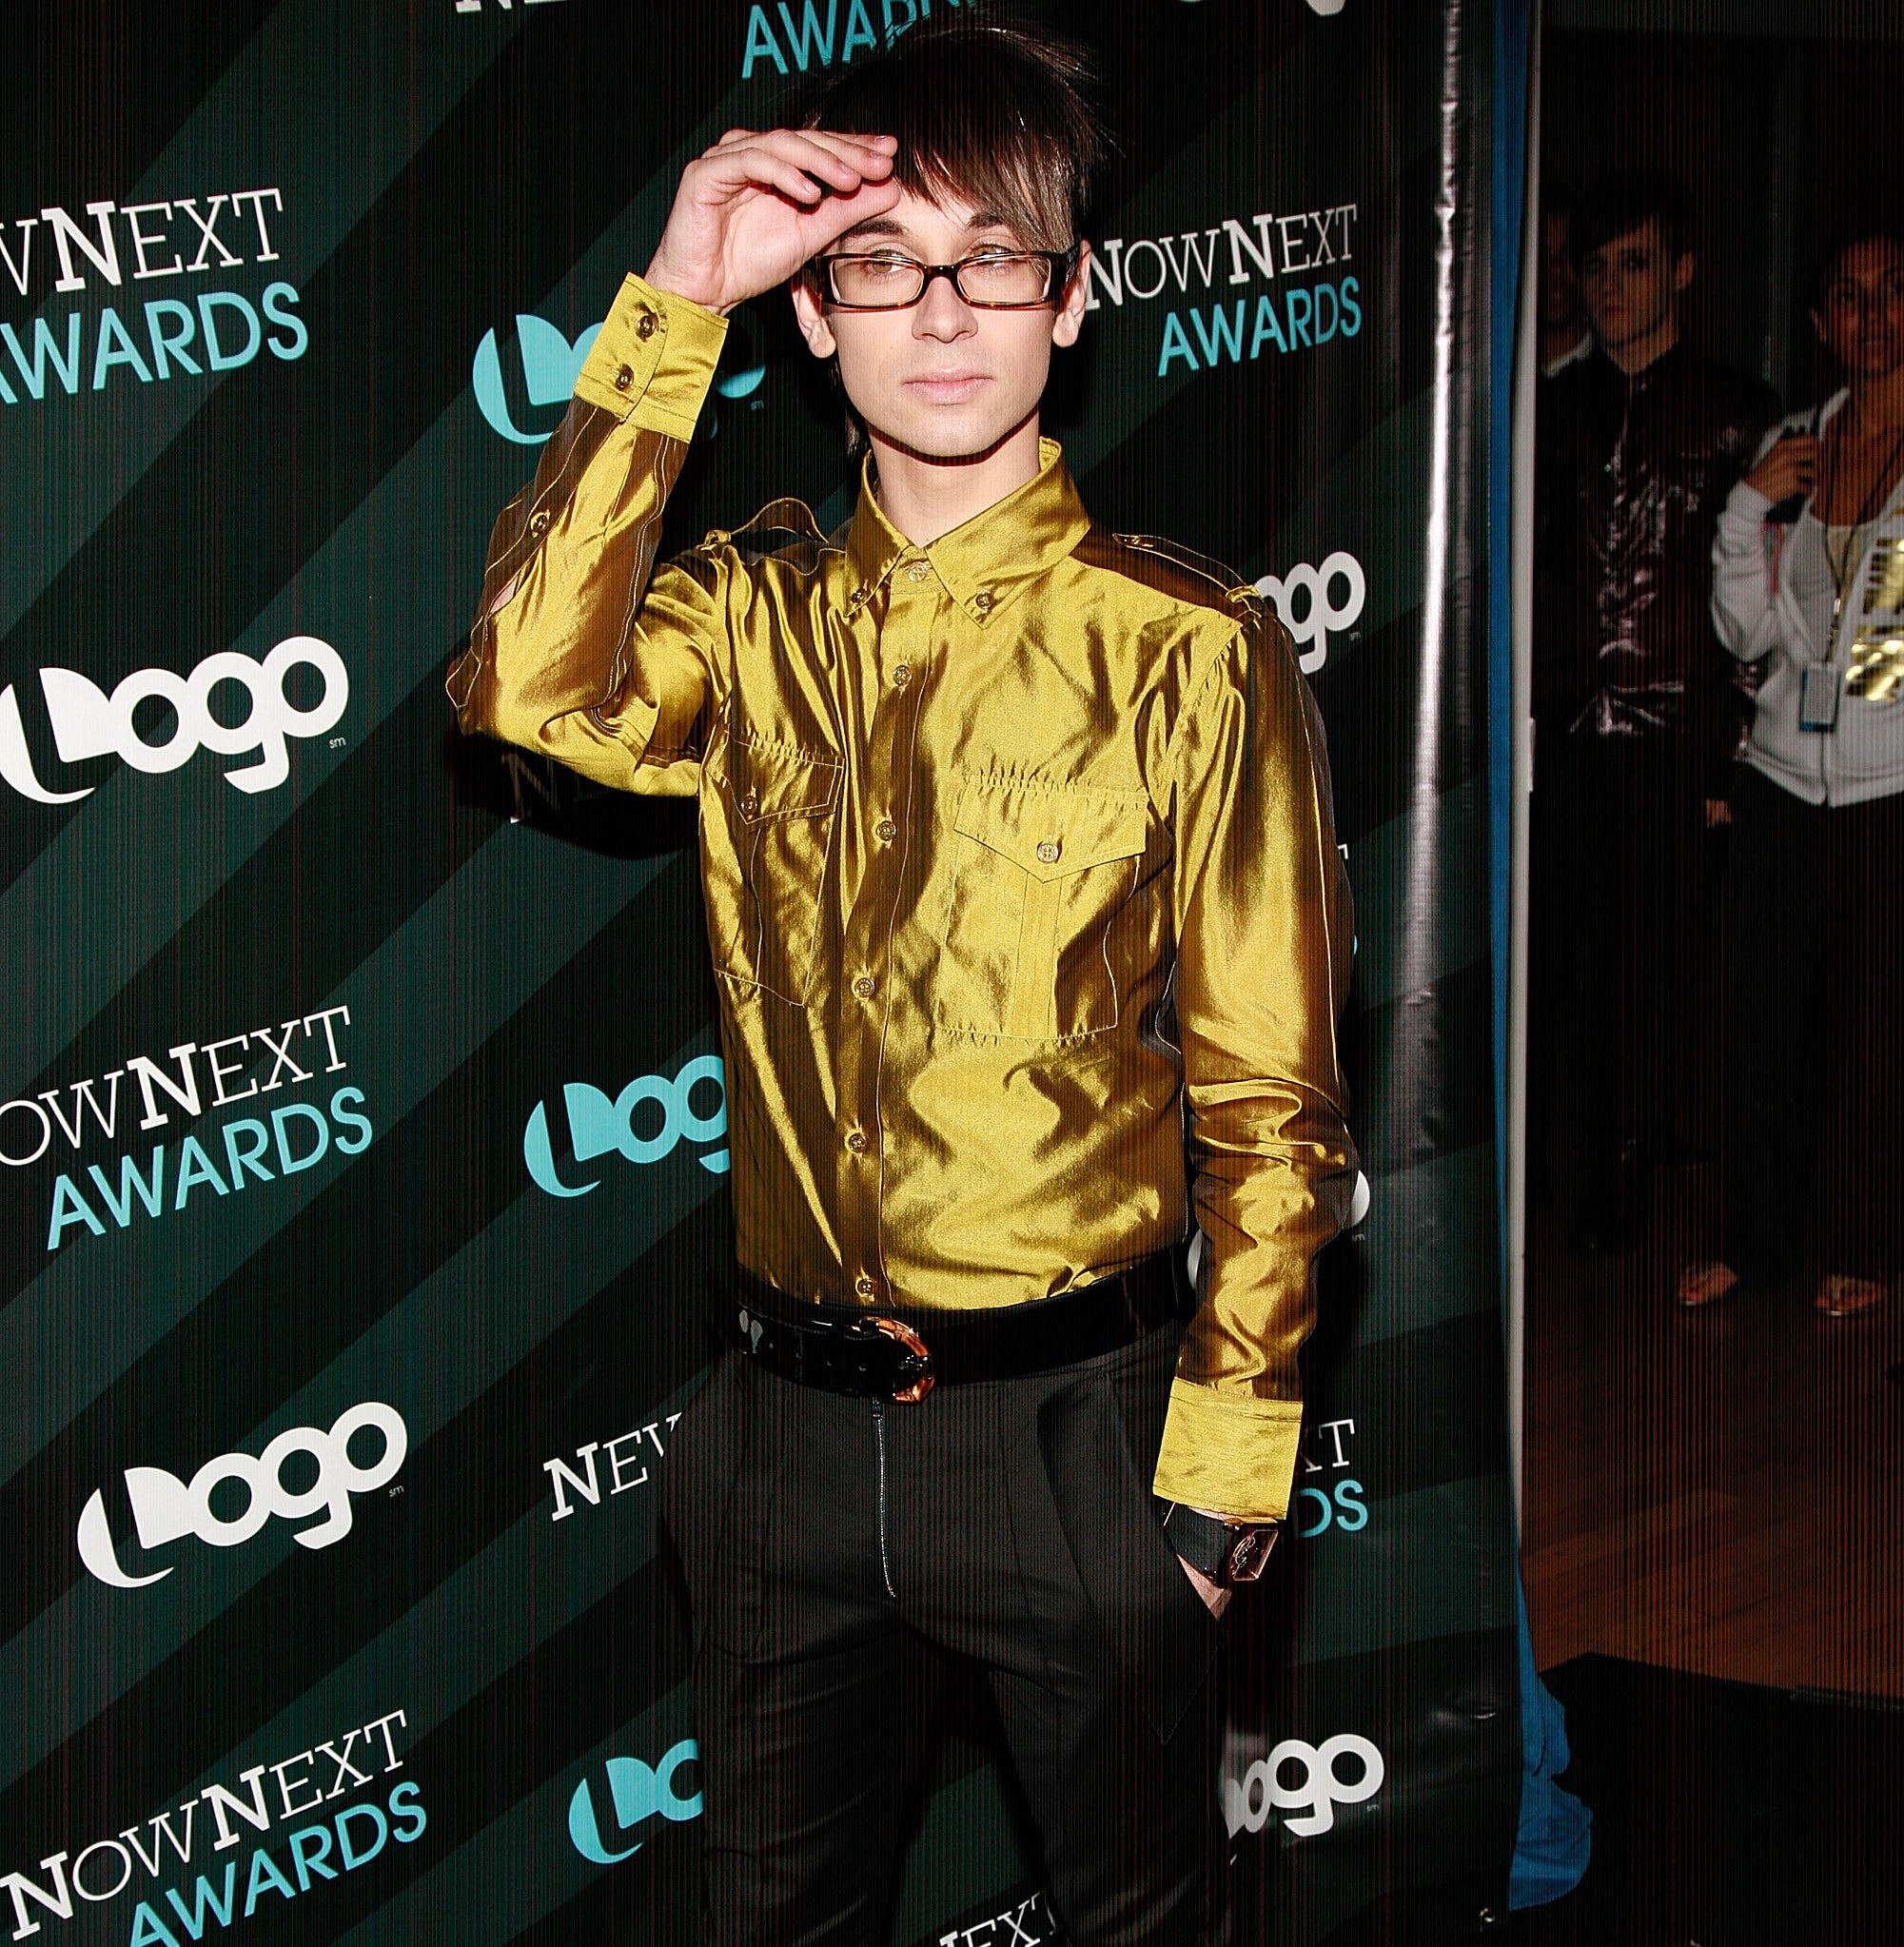 Christian Siriano wears a metallic long-sleeved shirt and dark pants on the red carpet at the Now Next Awards